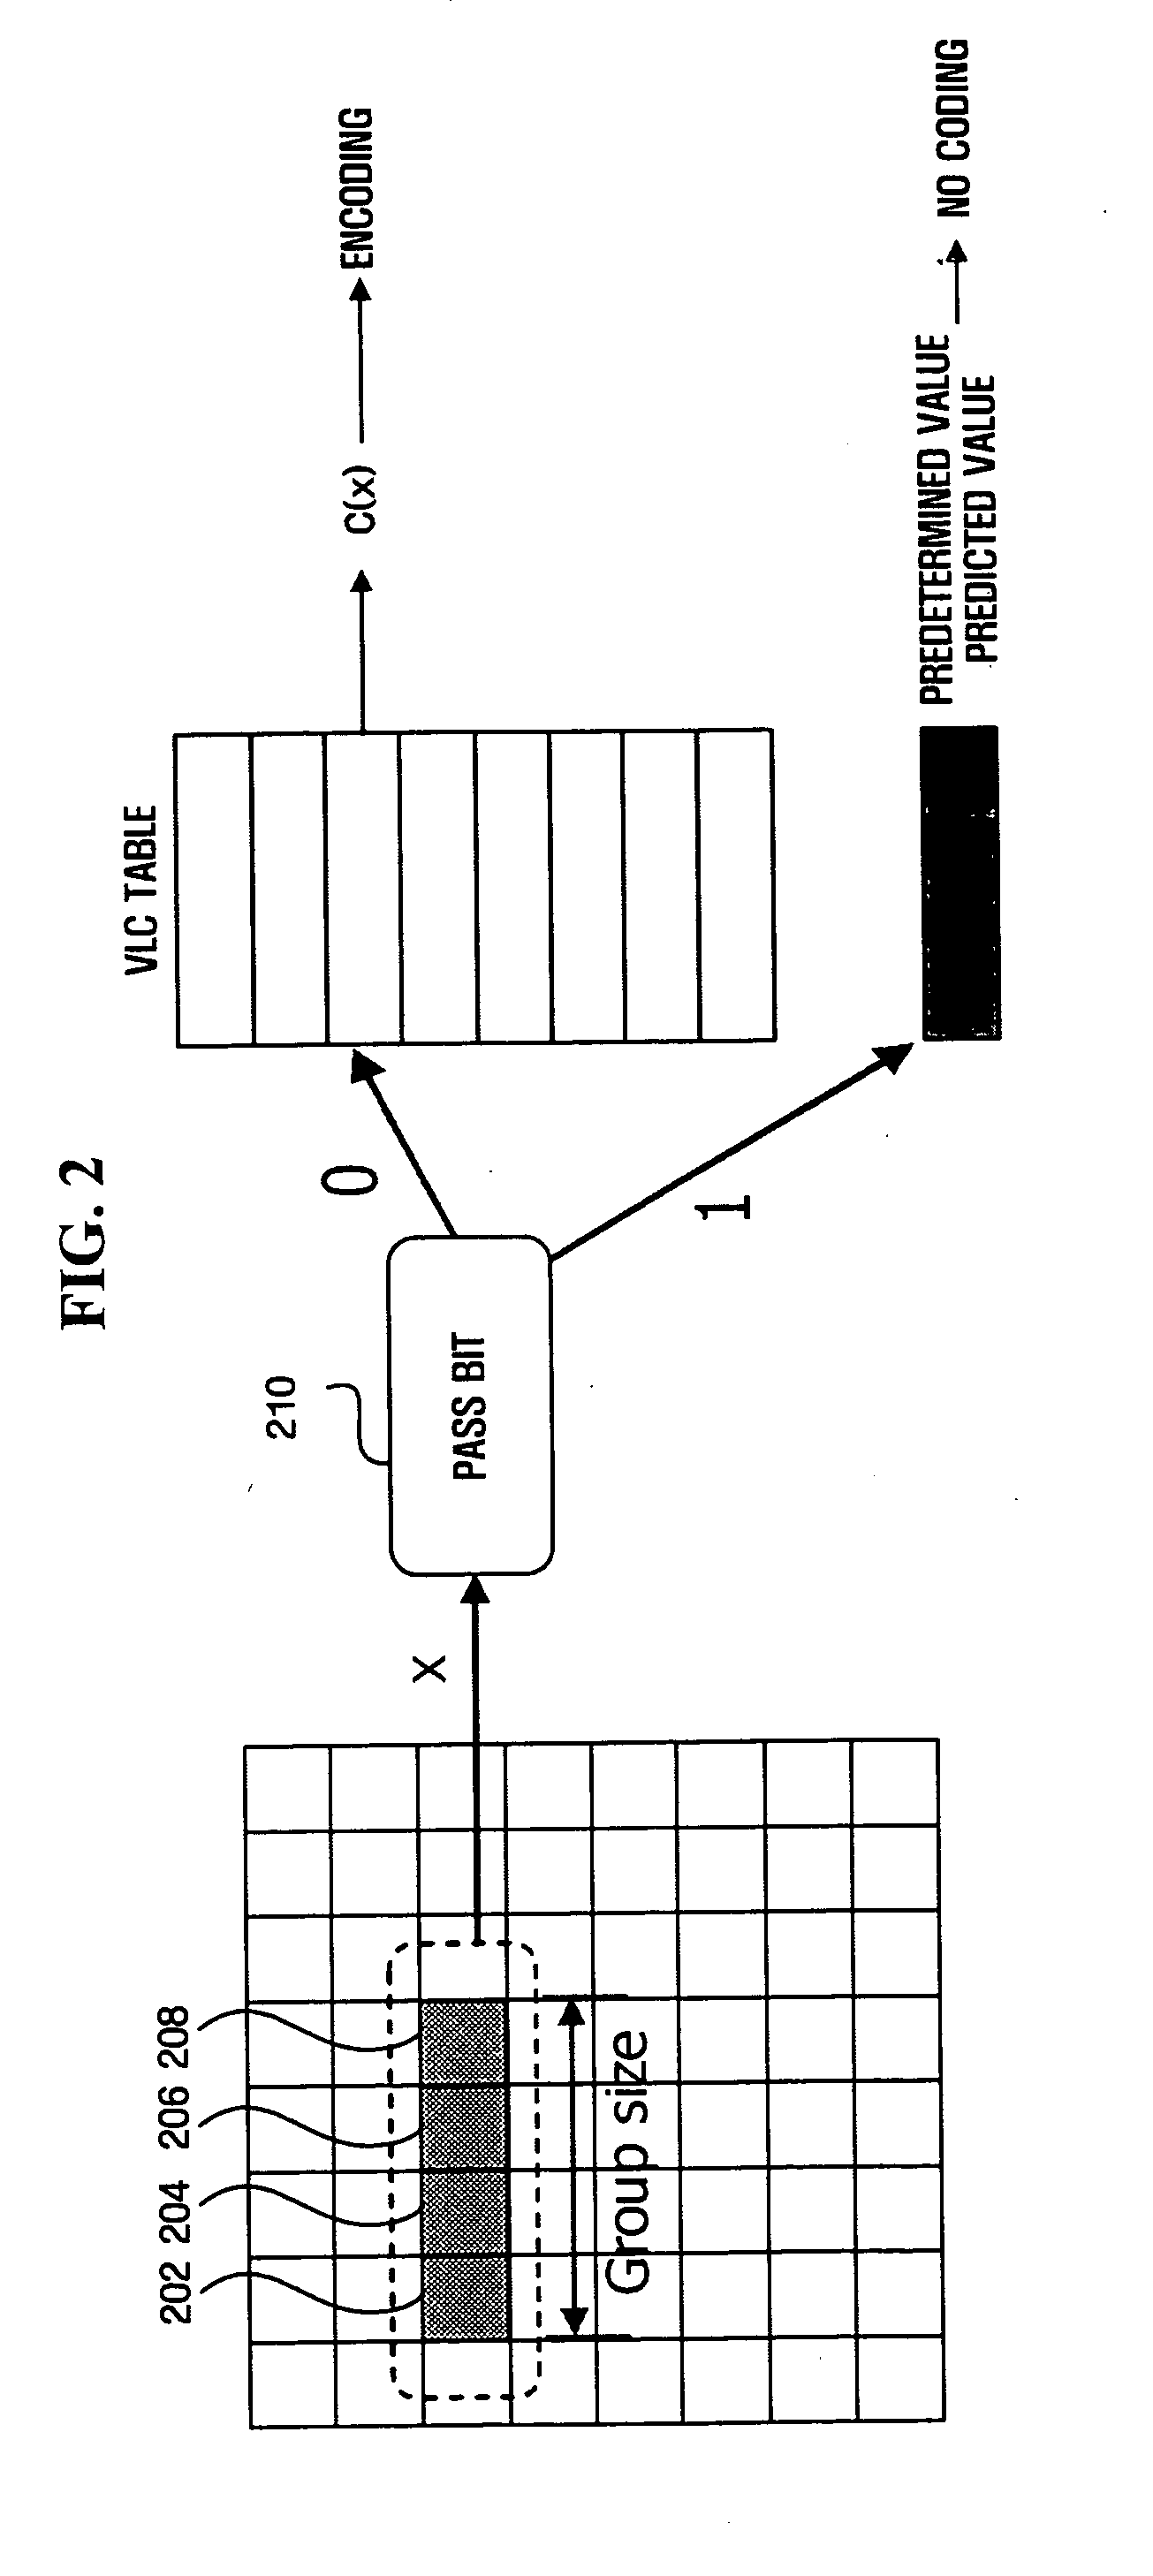 Method and apparatus for encoding and decoding video signals on group basis